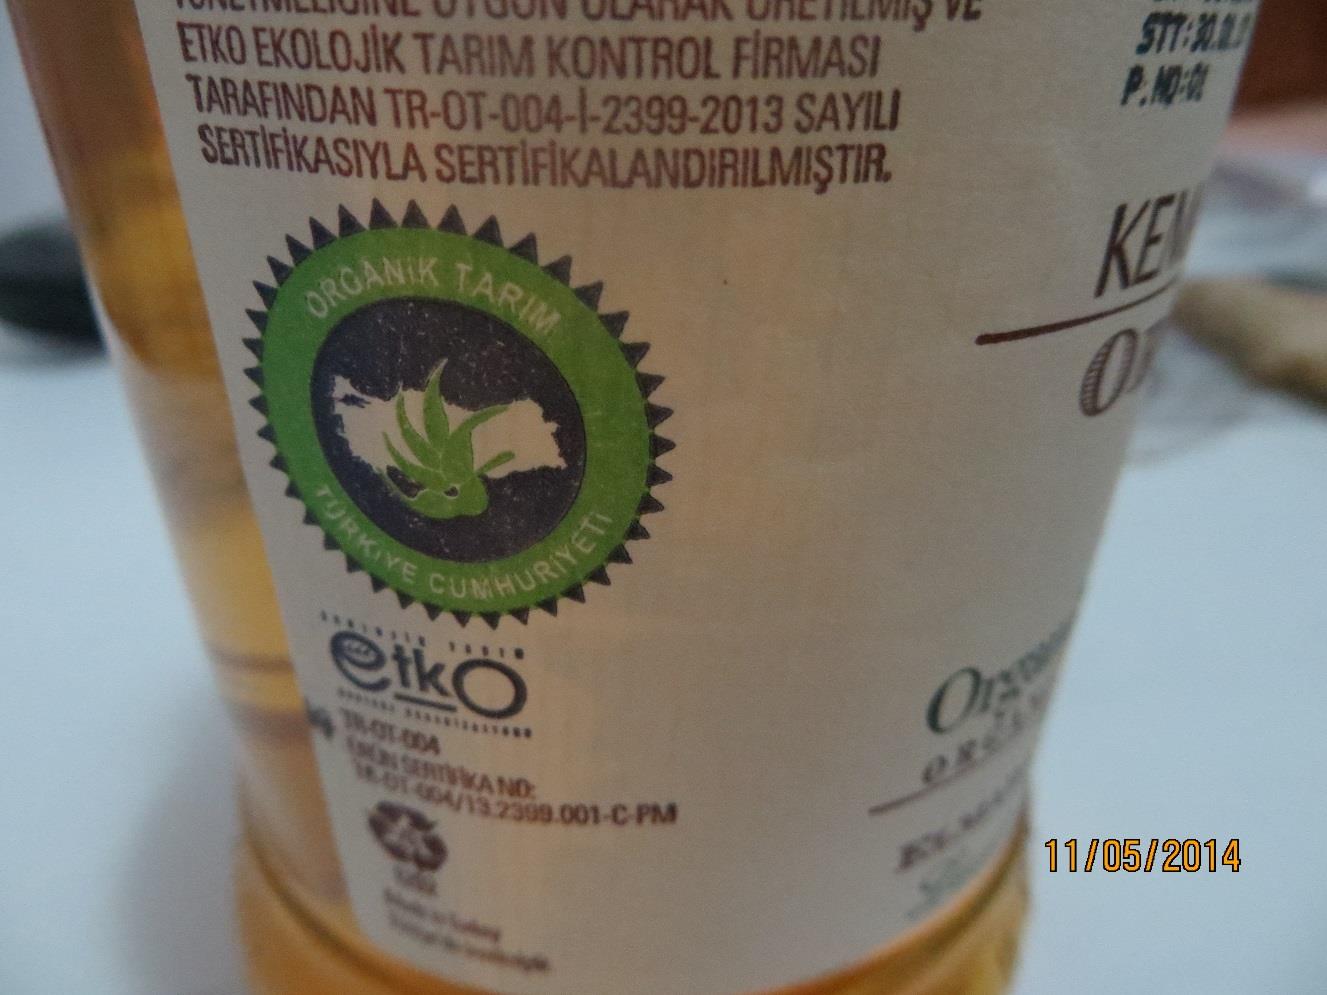 Certified organic products are labelled, Logo (1), Certifying CB (2).